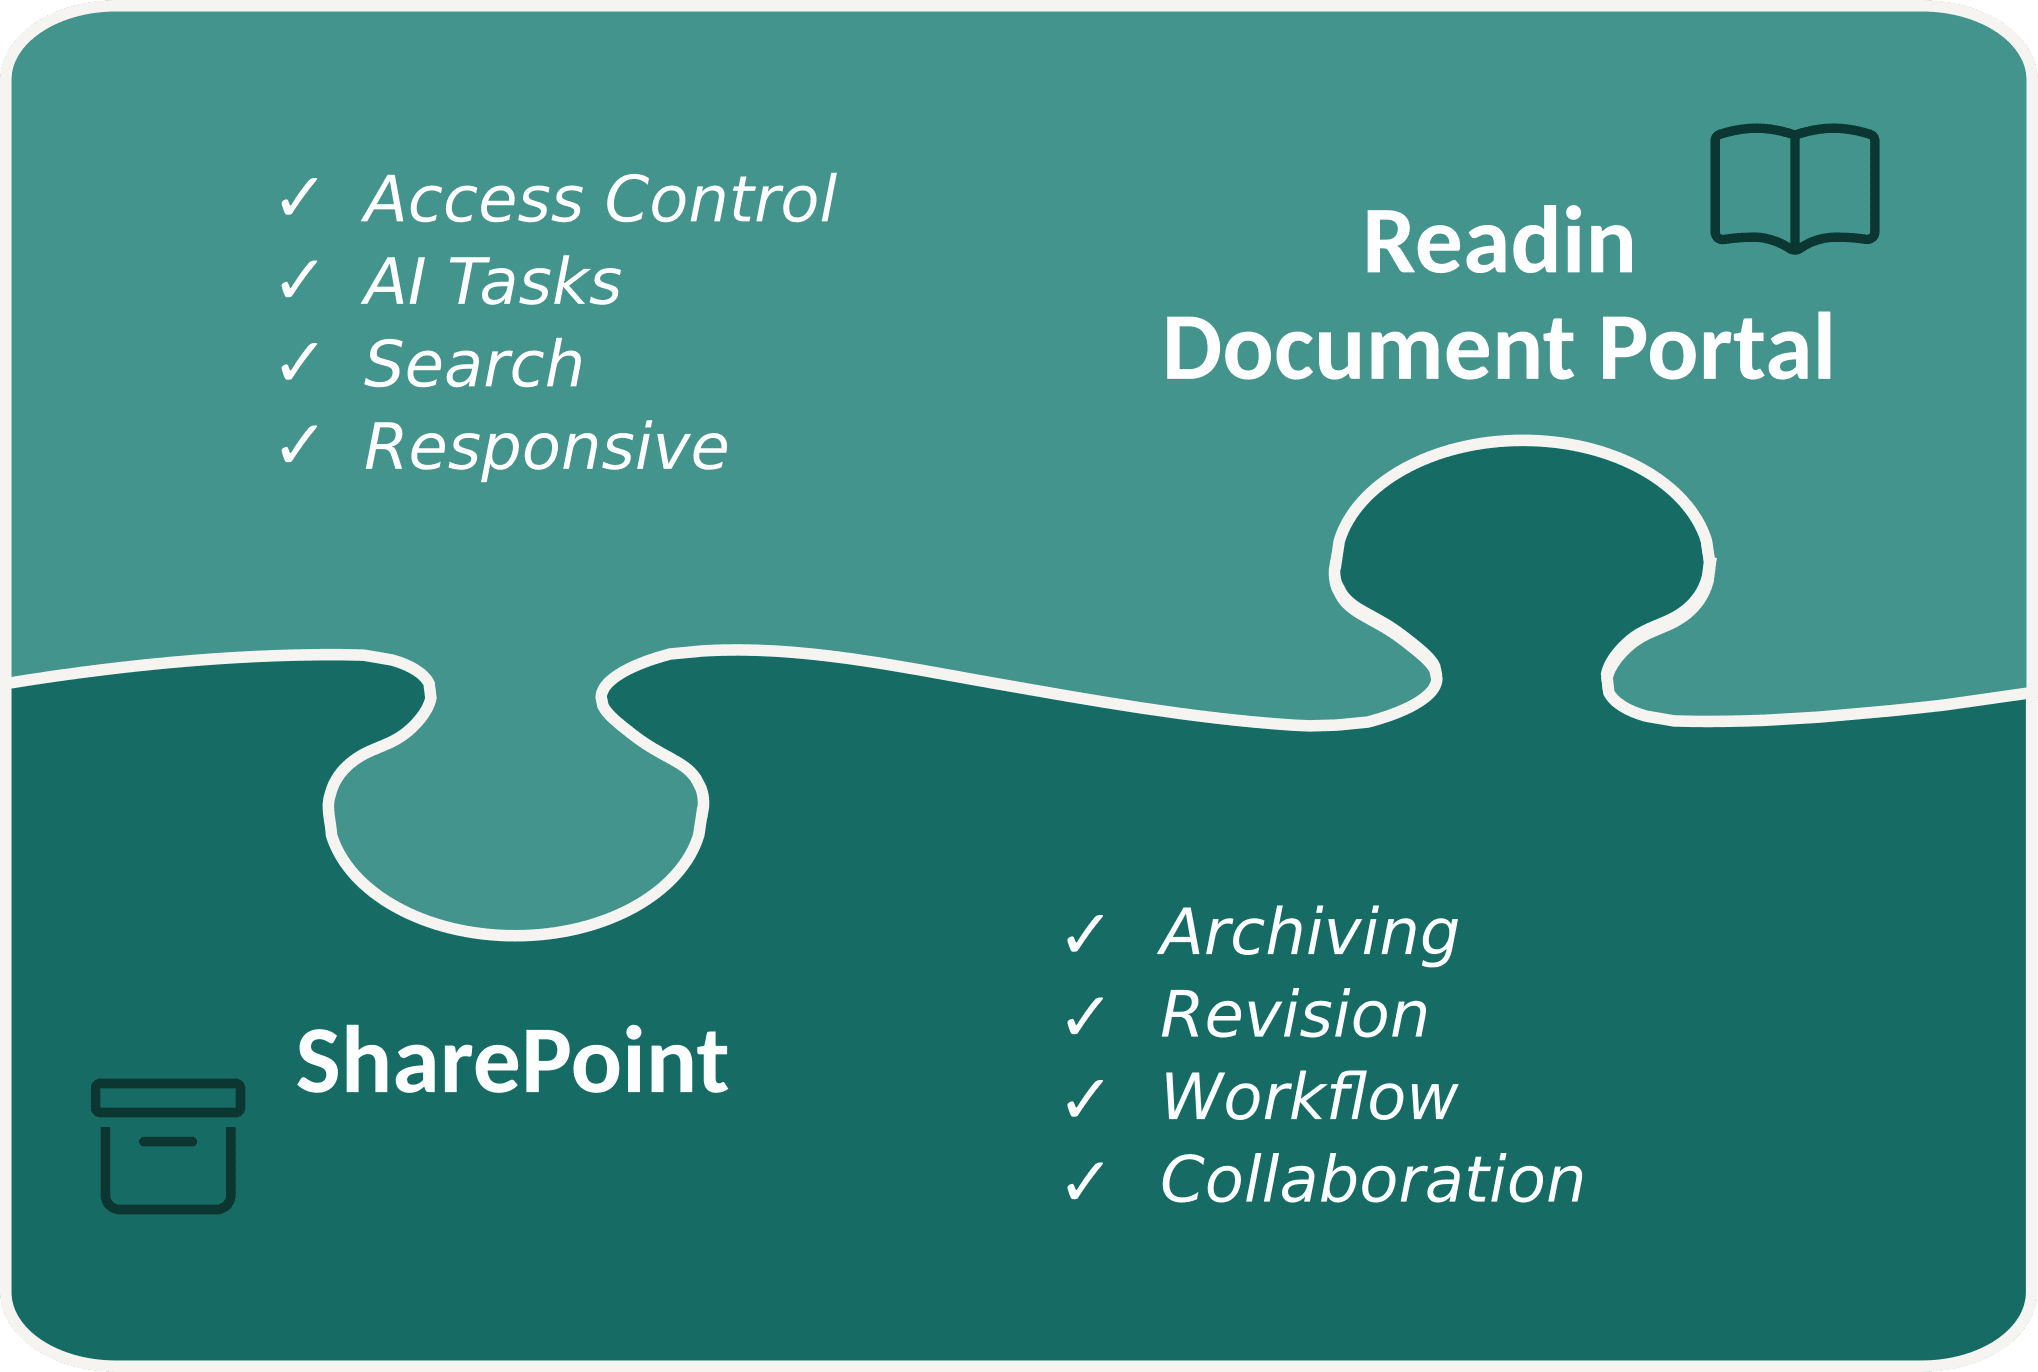 Readin and SharePoint integrated